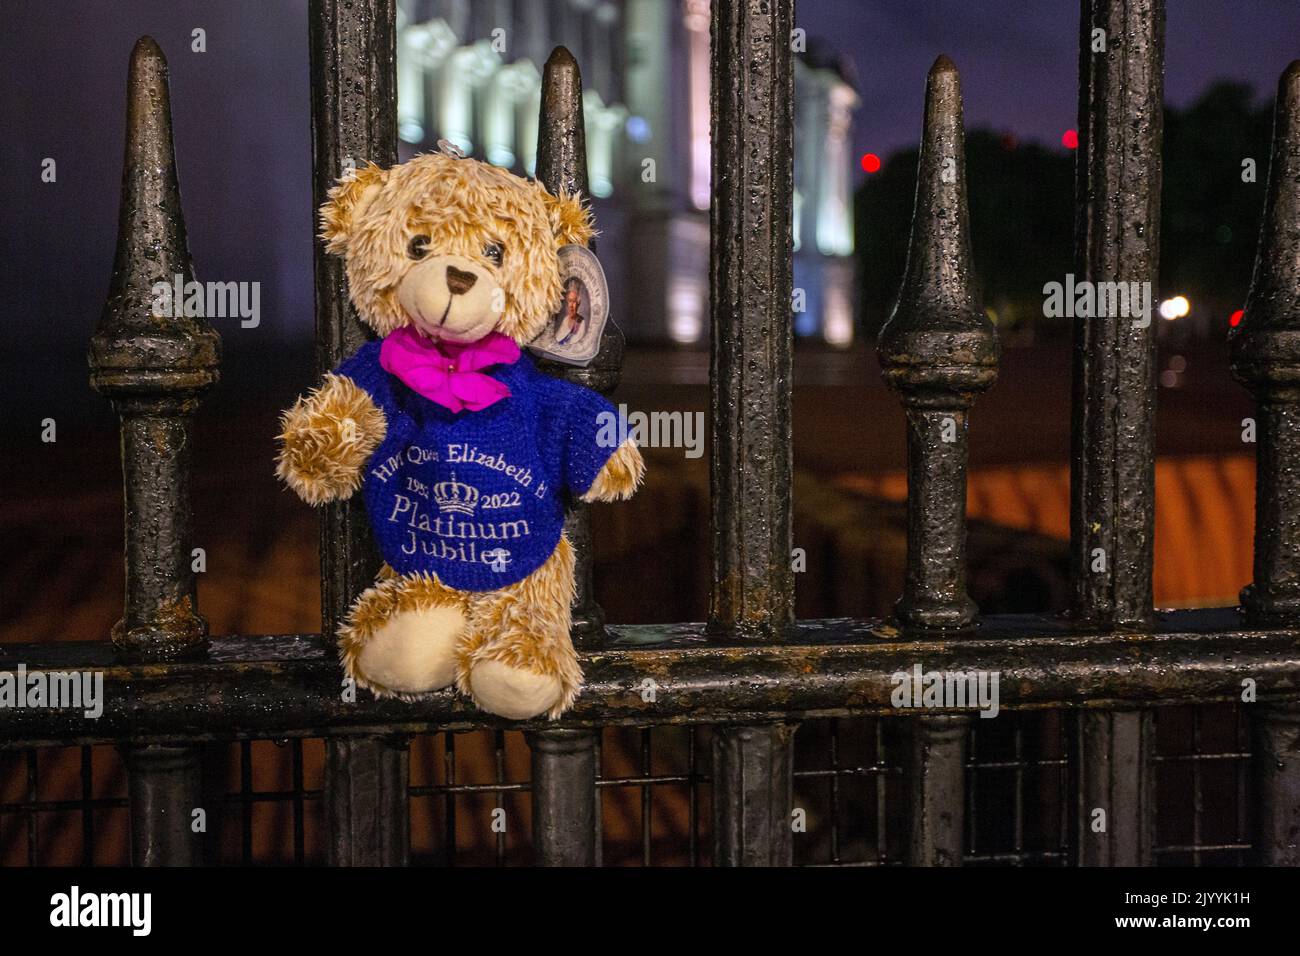 LONDON, ENGLAND - SEPTEMBER 08: Members of the public place Queen Elizabeth Platinum Jubilee Teddy Bear on the Buckingham Palace to pay their respects following the death today of Queen Elizabeth their respects following the death today of Queen Elizabeth ,Credit: Horst A. Friedrichs Alamy Live News Stock Photo